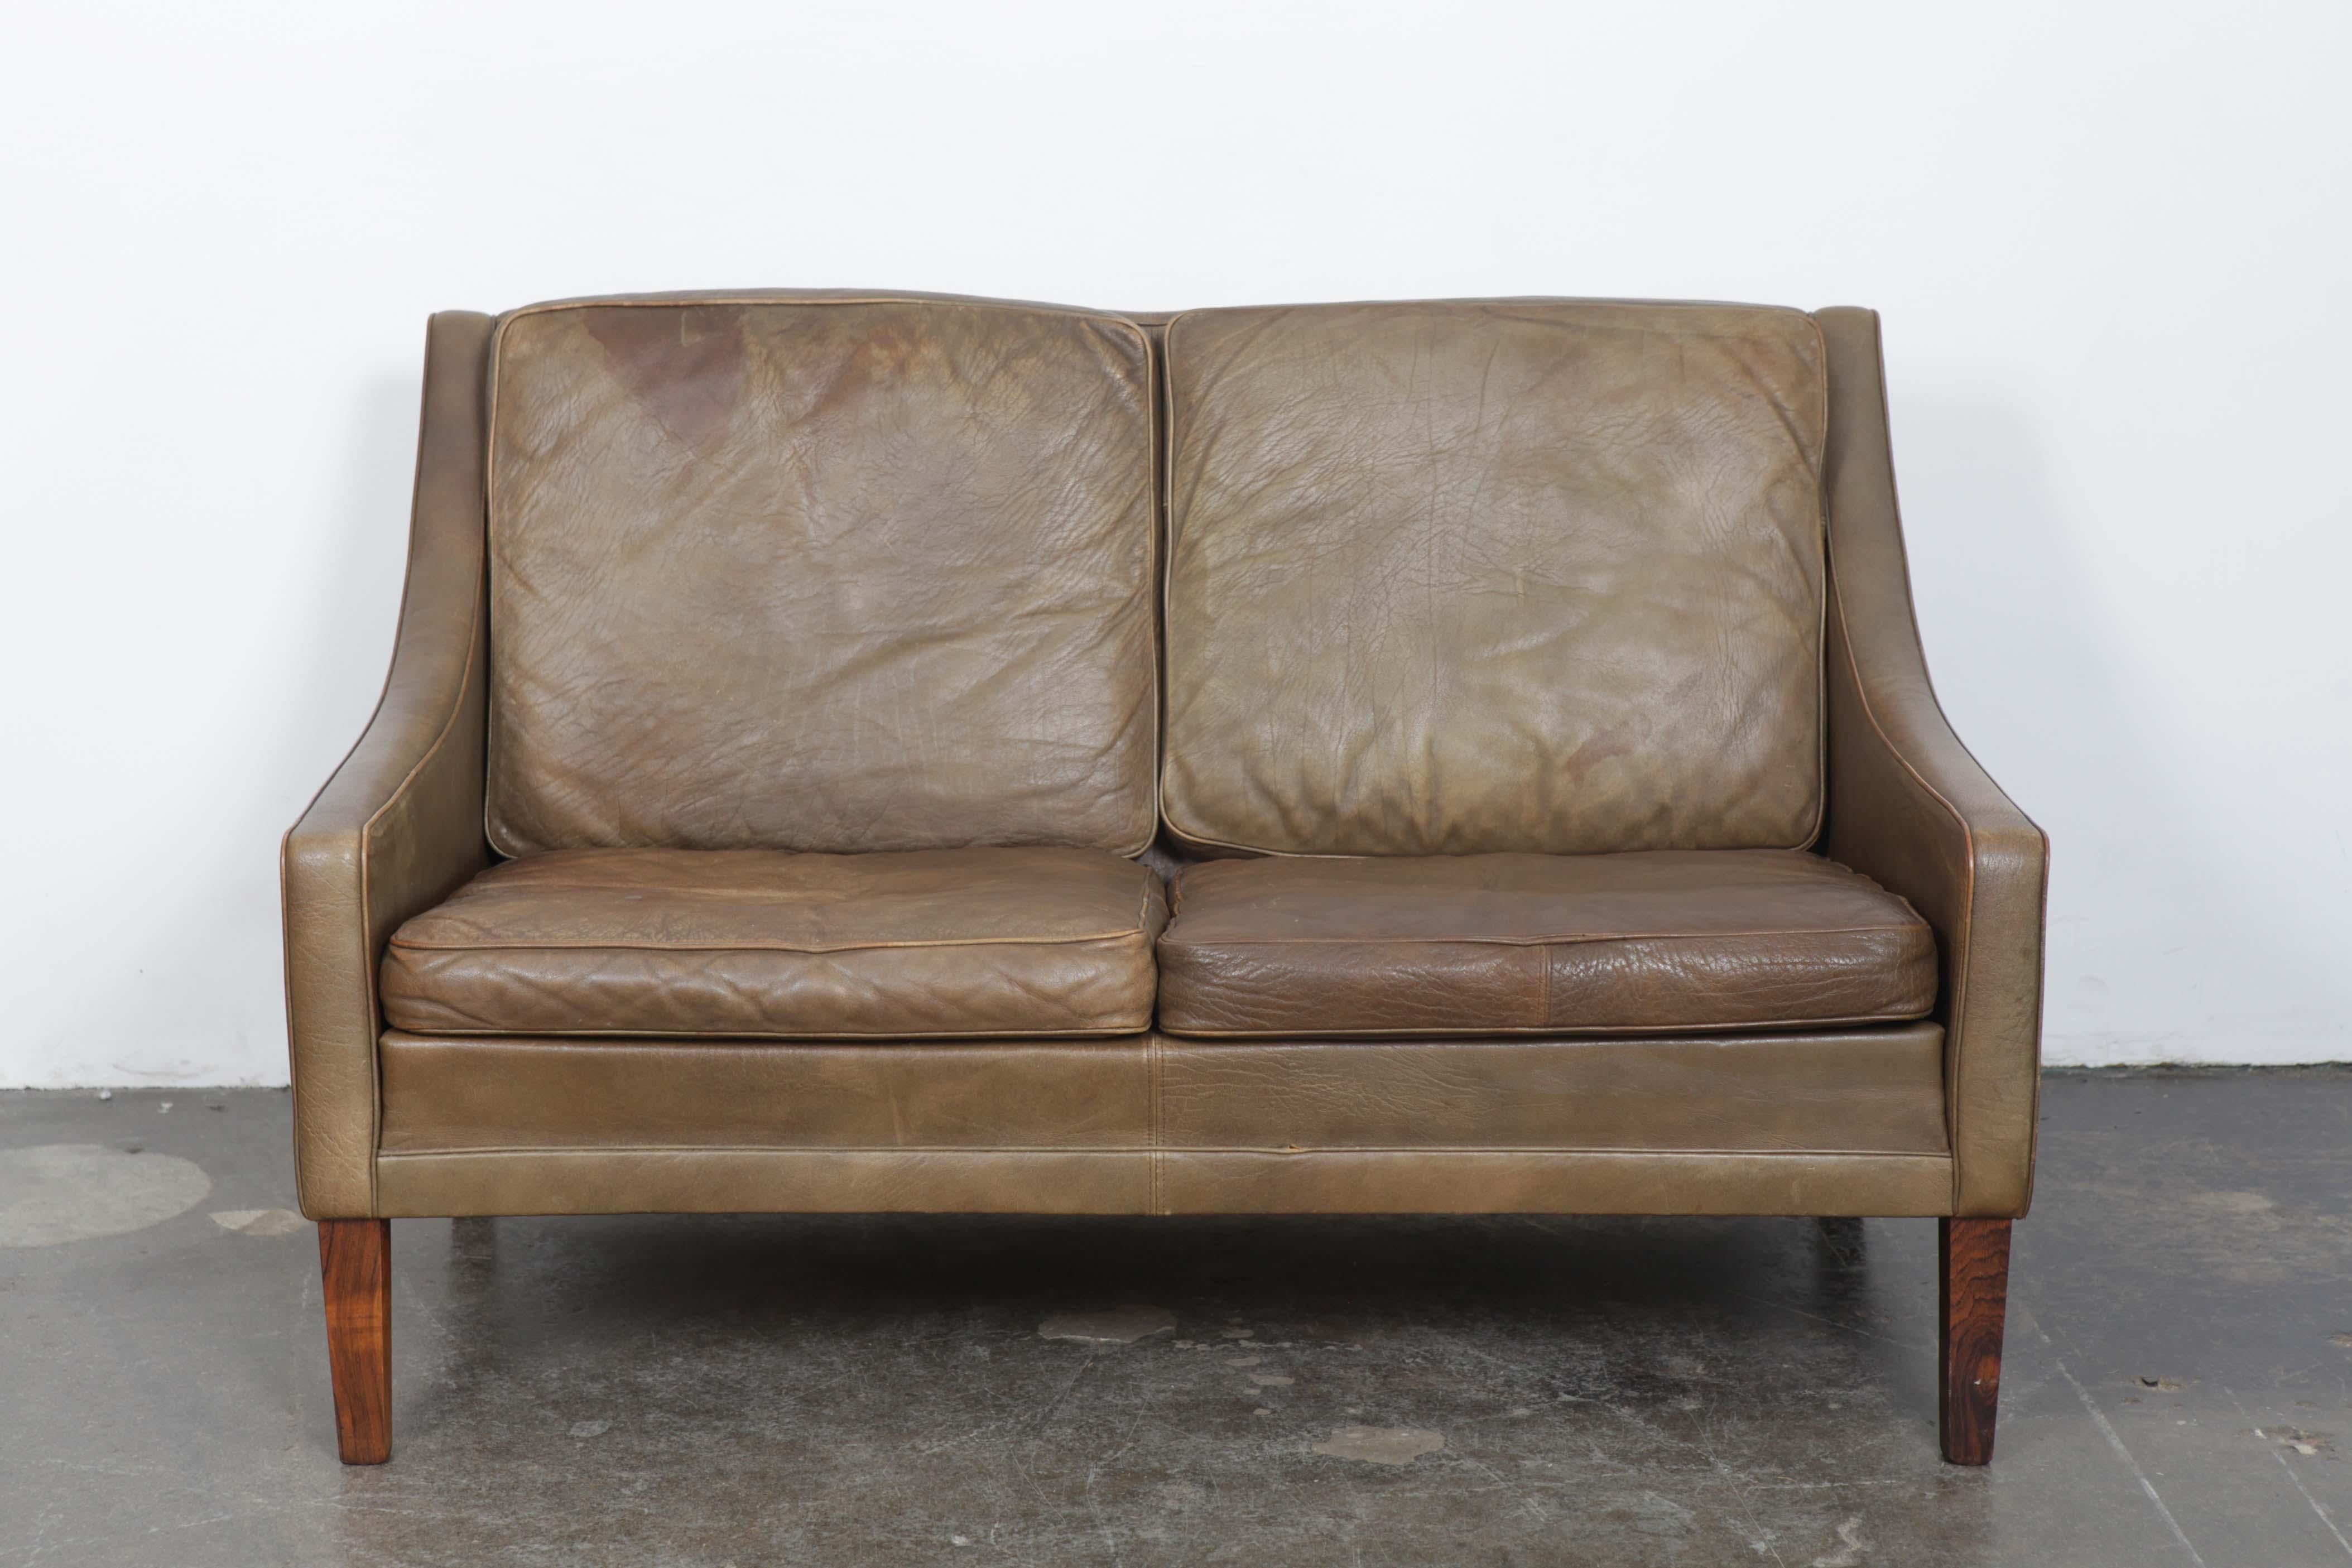 1960s 2-seat Danish Mid-Century Modern sofa in the manner of Børge Mogesen, in original leather with stained solid wood legs. The sofa has no tears or rips or other damage but does have discoloring and patina throughout.